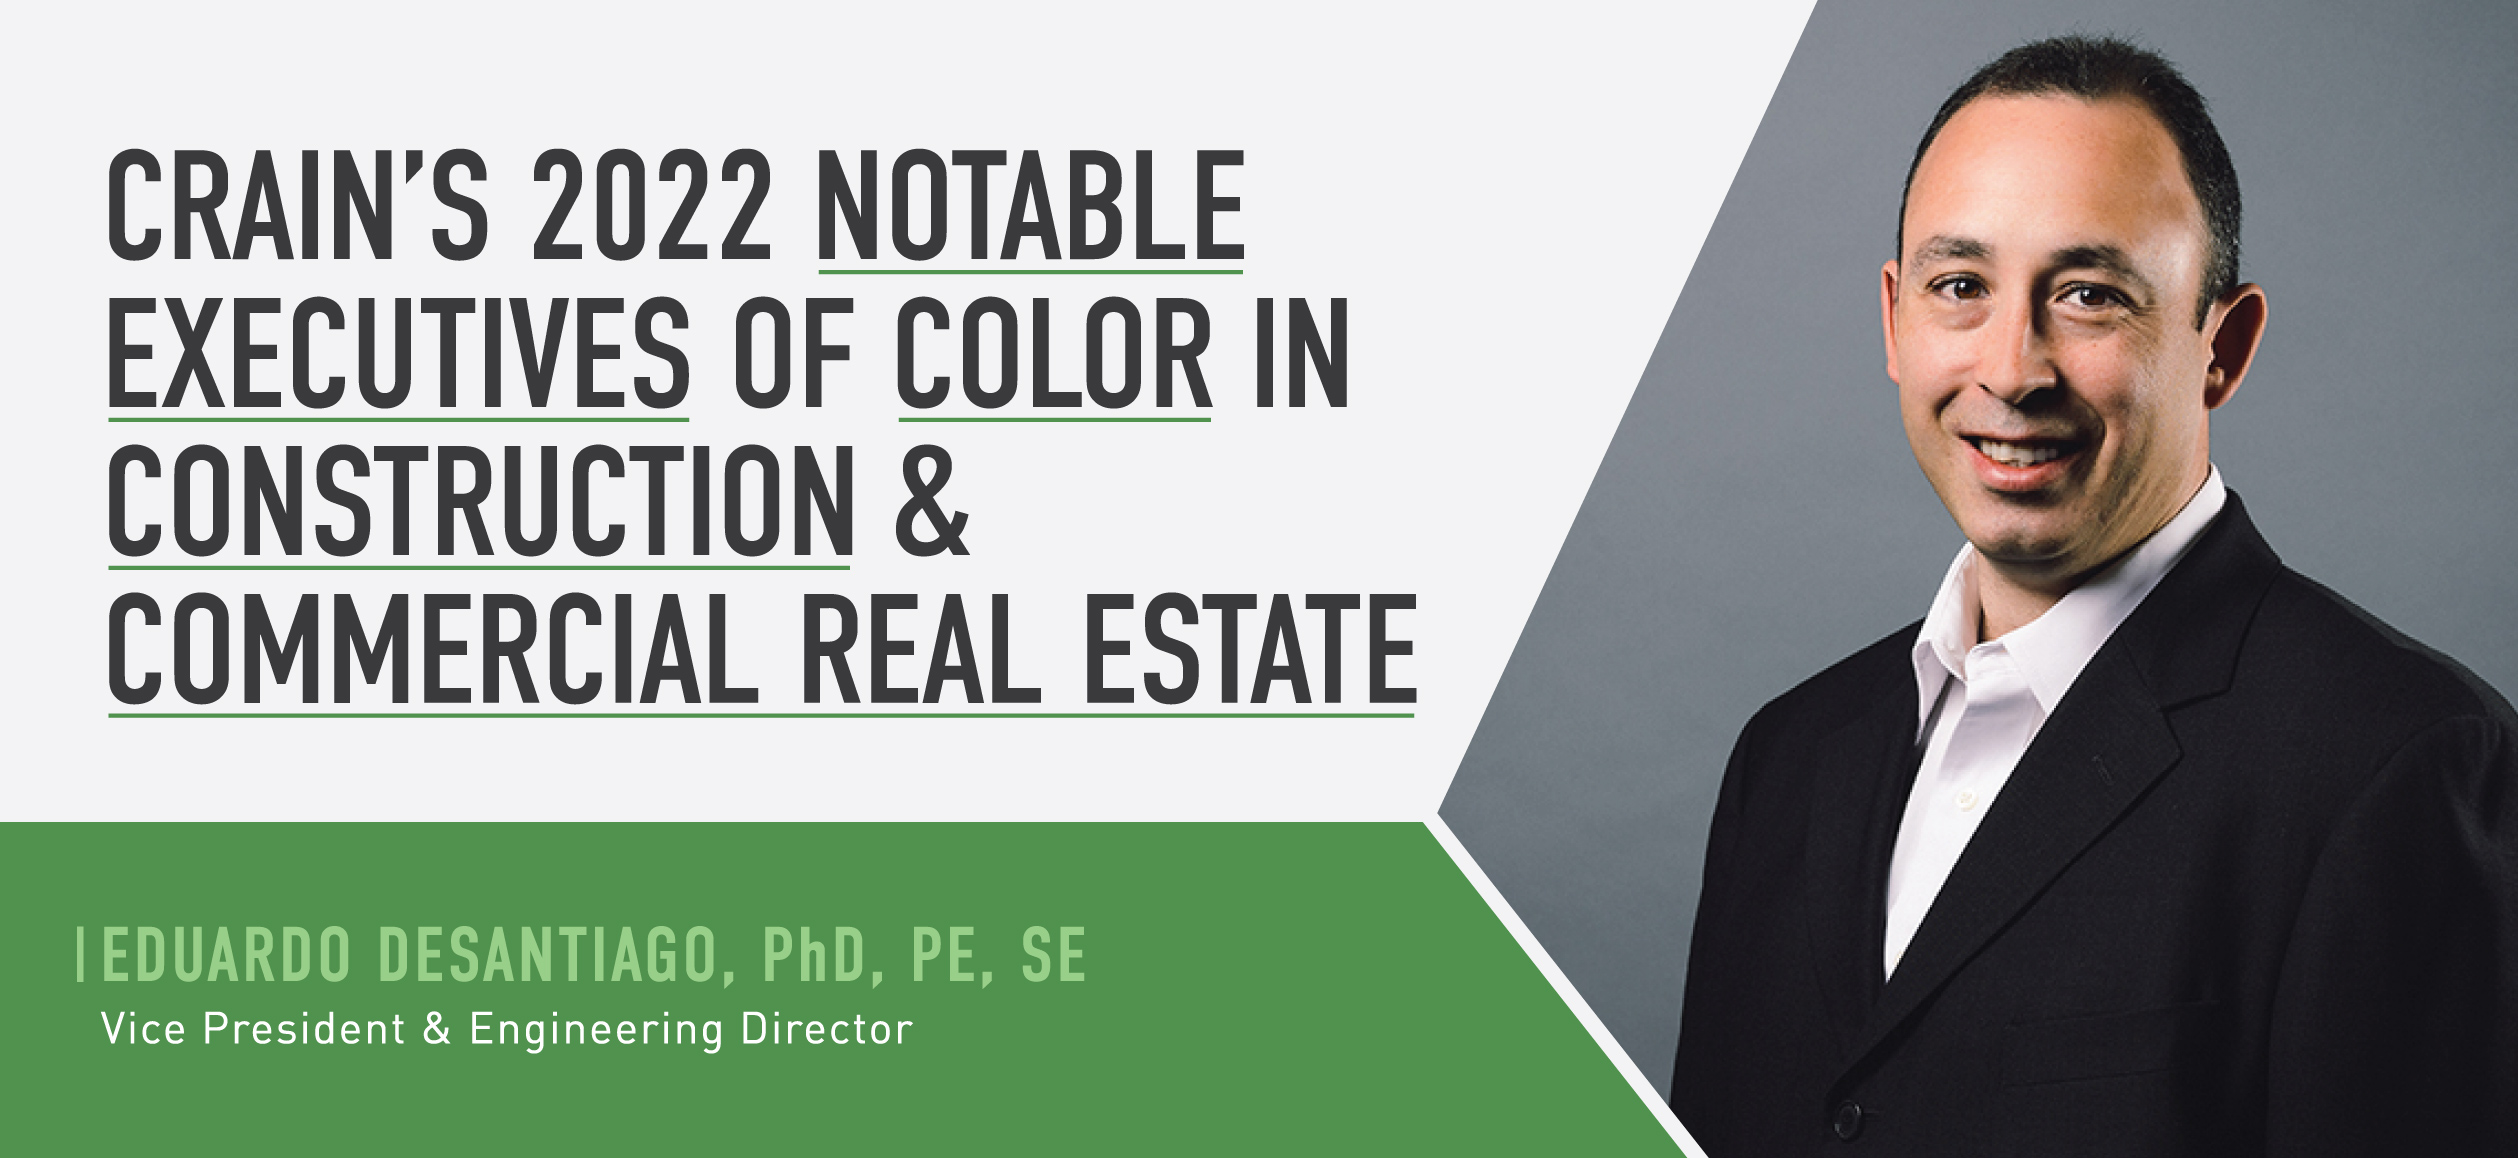 Eduardo DeSantiago Recognized in Crain’s 2022 Notable Executives of Color in Construction and Commercial Real Estate